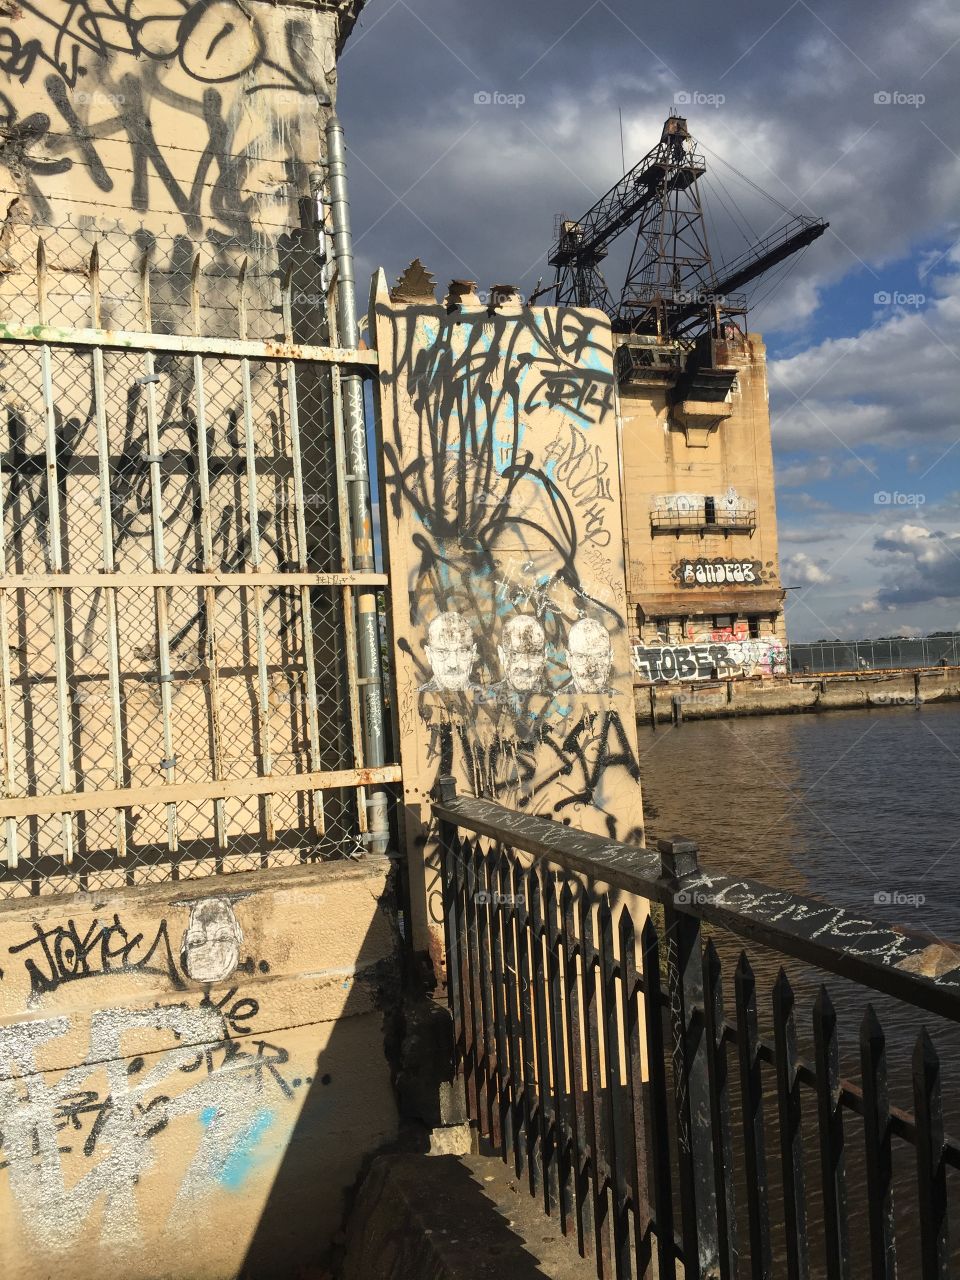 October skies abandon buildings with graffiti overlooking the river..